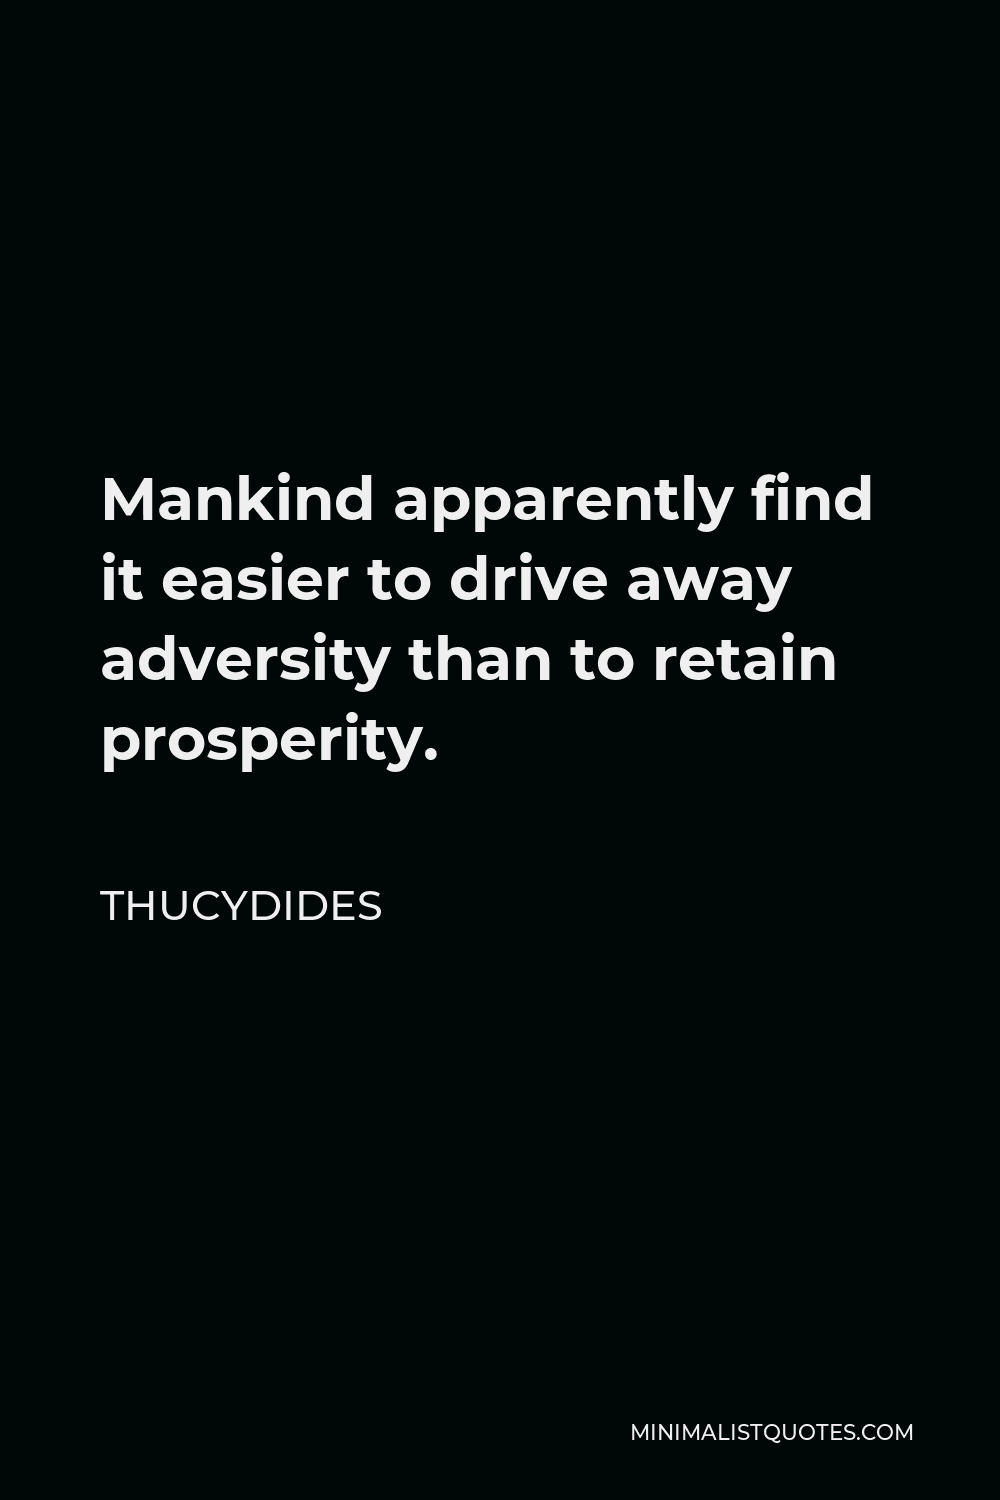 Thucydides Quote - Mankind apparently find it easier to drive away adversity than to retain prosperity.